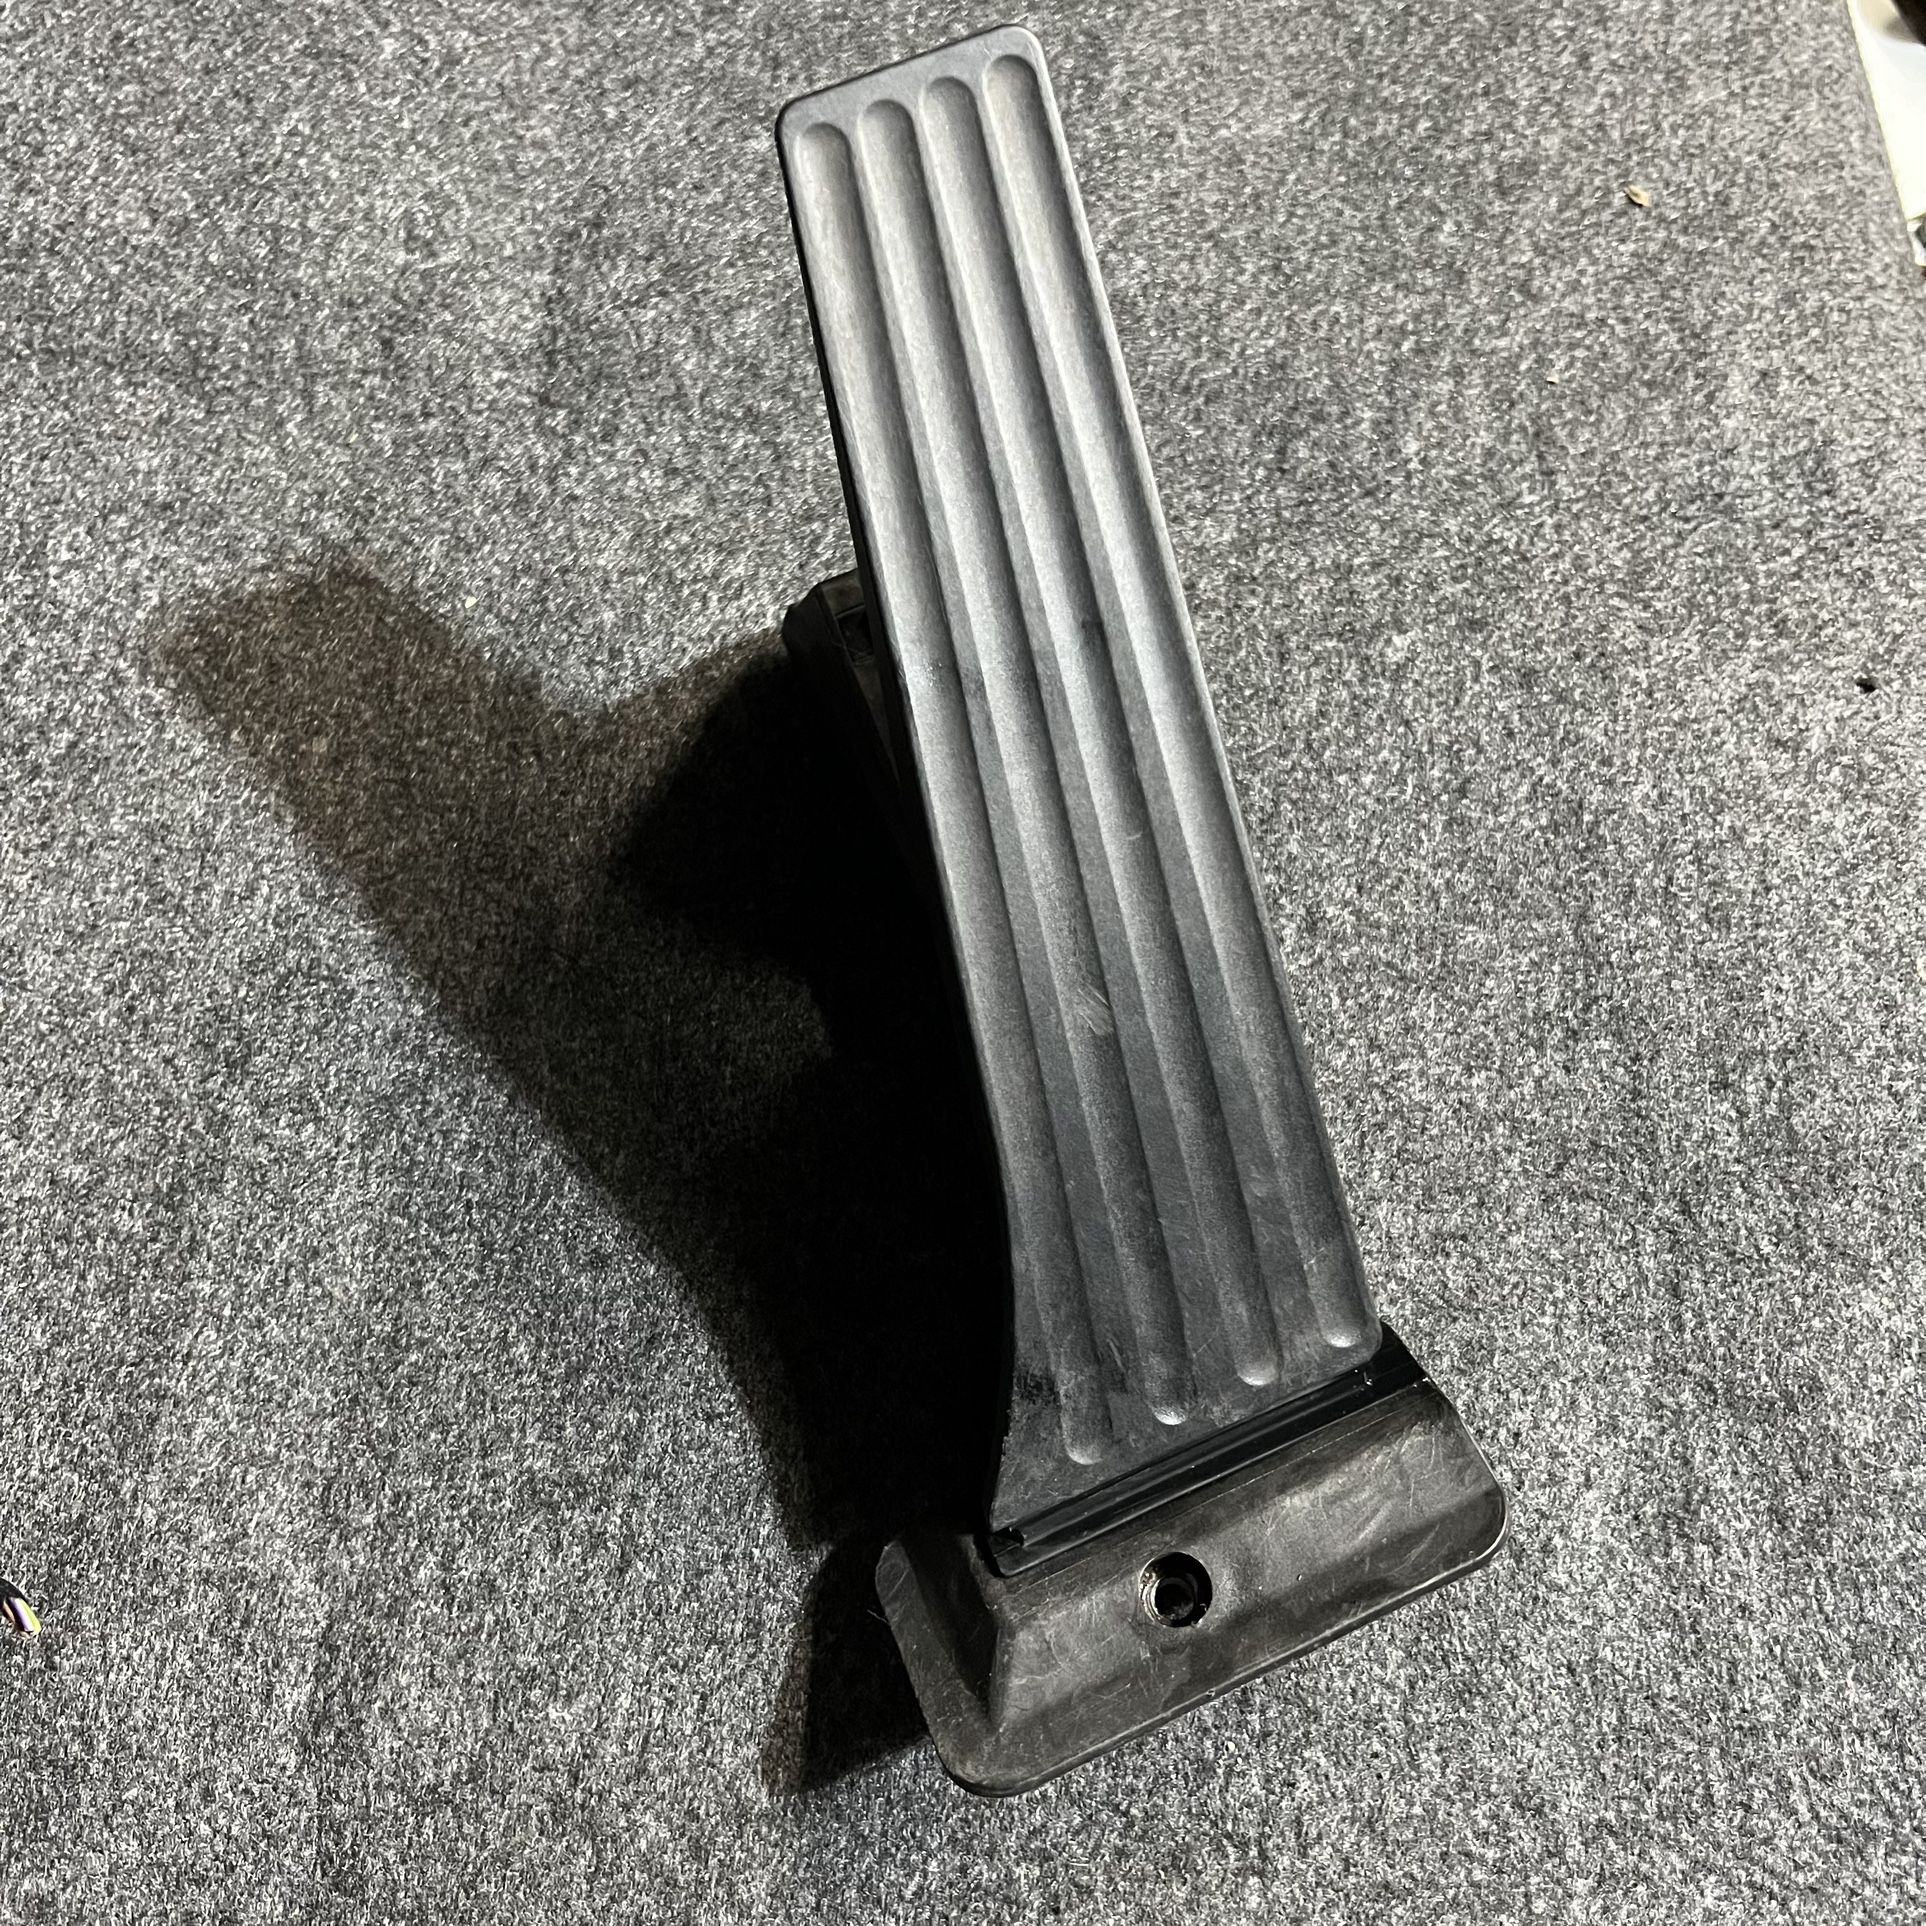 BMW F10 ACCELERATOR GAS PEDAL OEM 3(contact info removed)-02